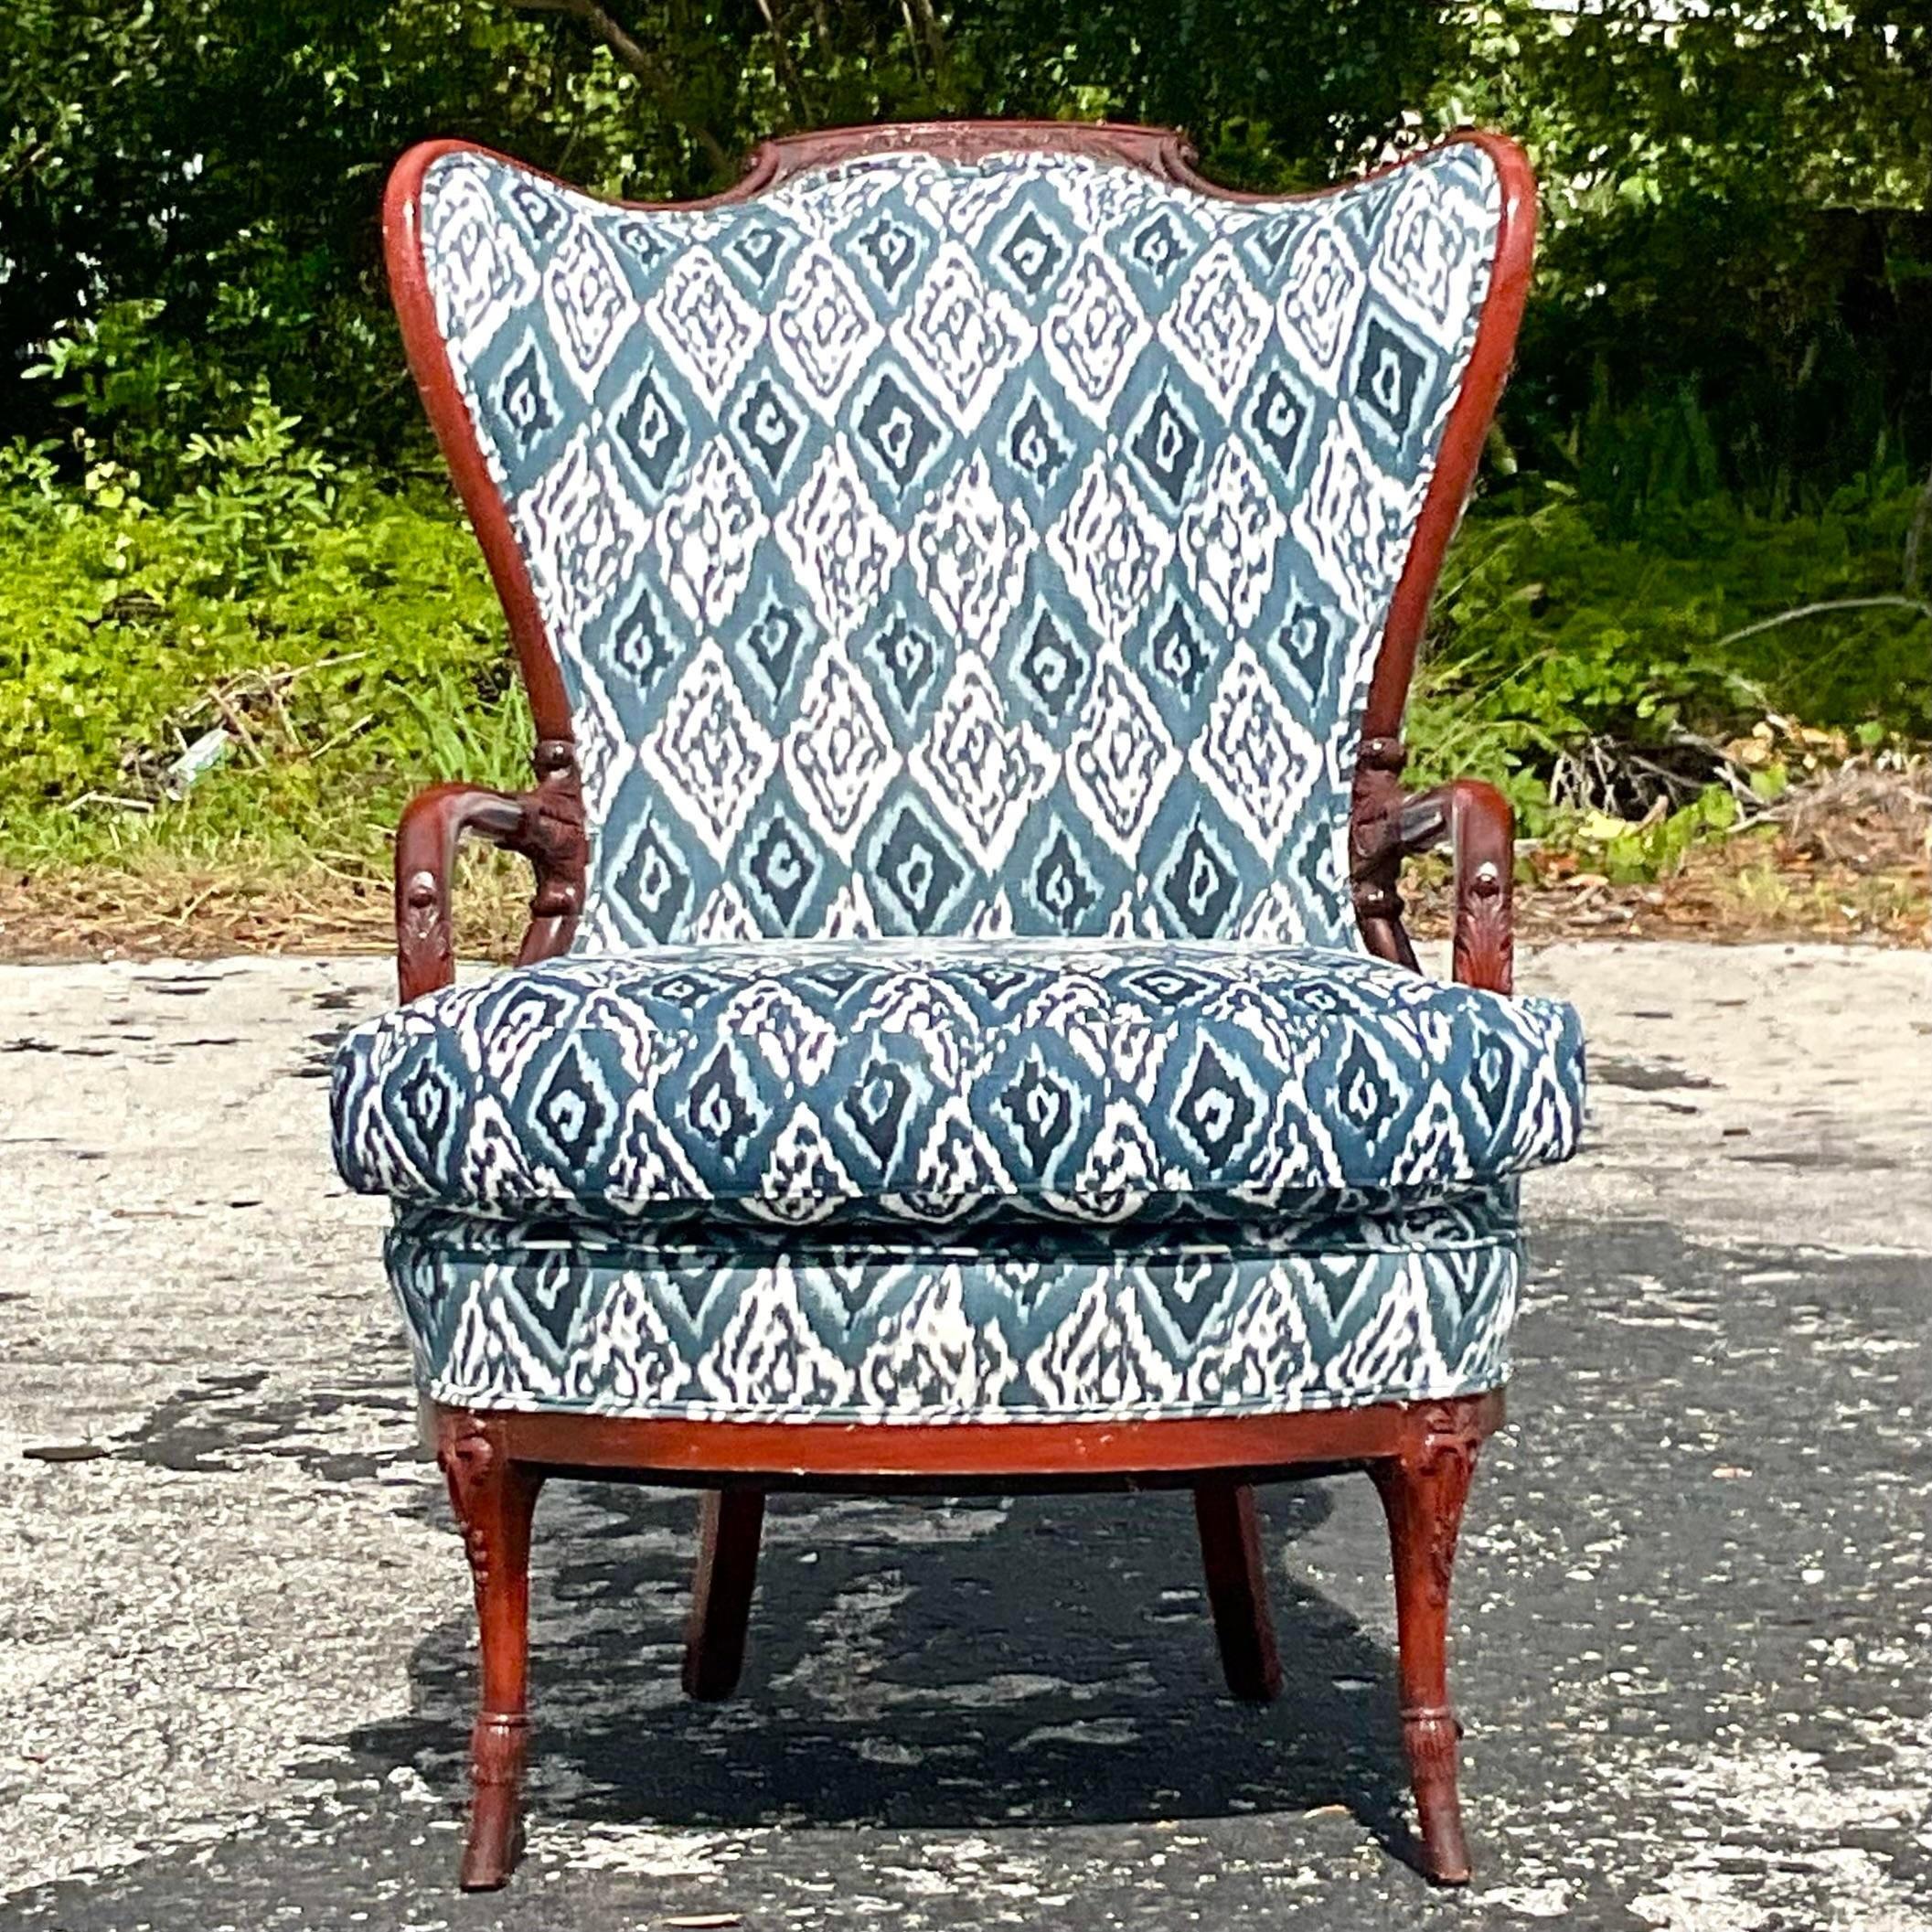 A fantastic vintage Boho wingback chair. A chic Schumacher Ikat print in beautiful shades of blue. Hand carved wood carved detail. Acquired from a Palm Beach estate.